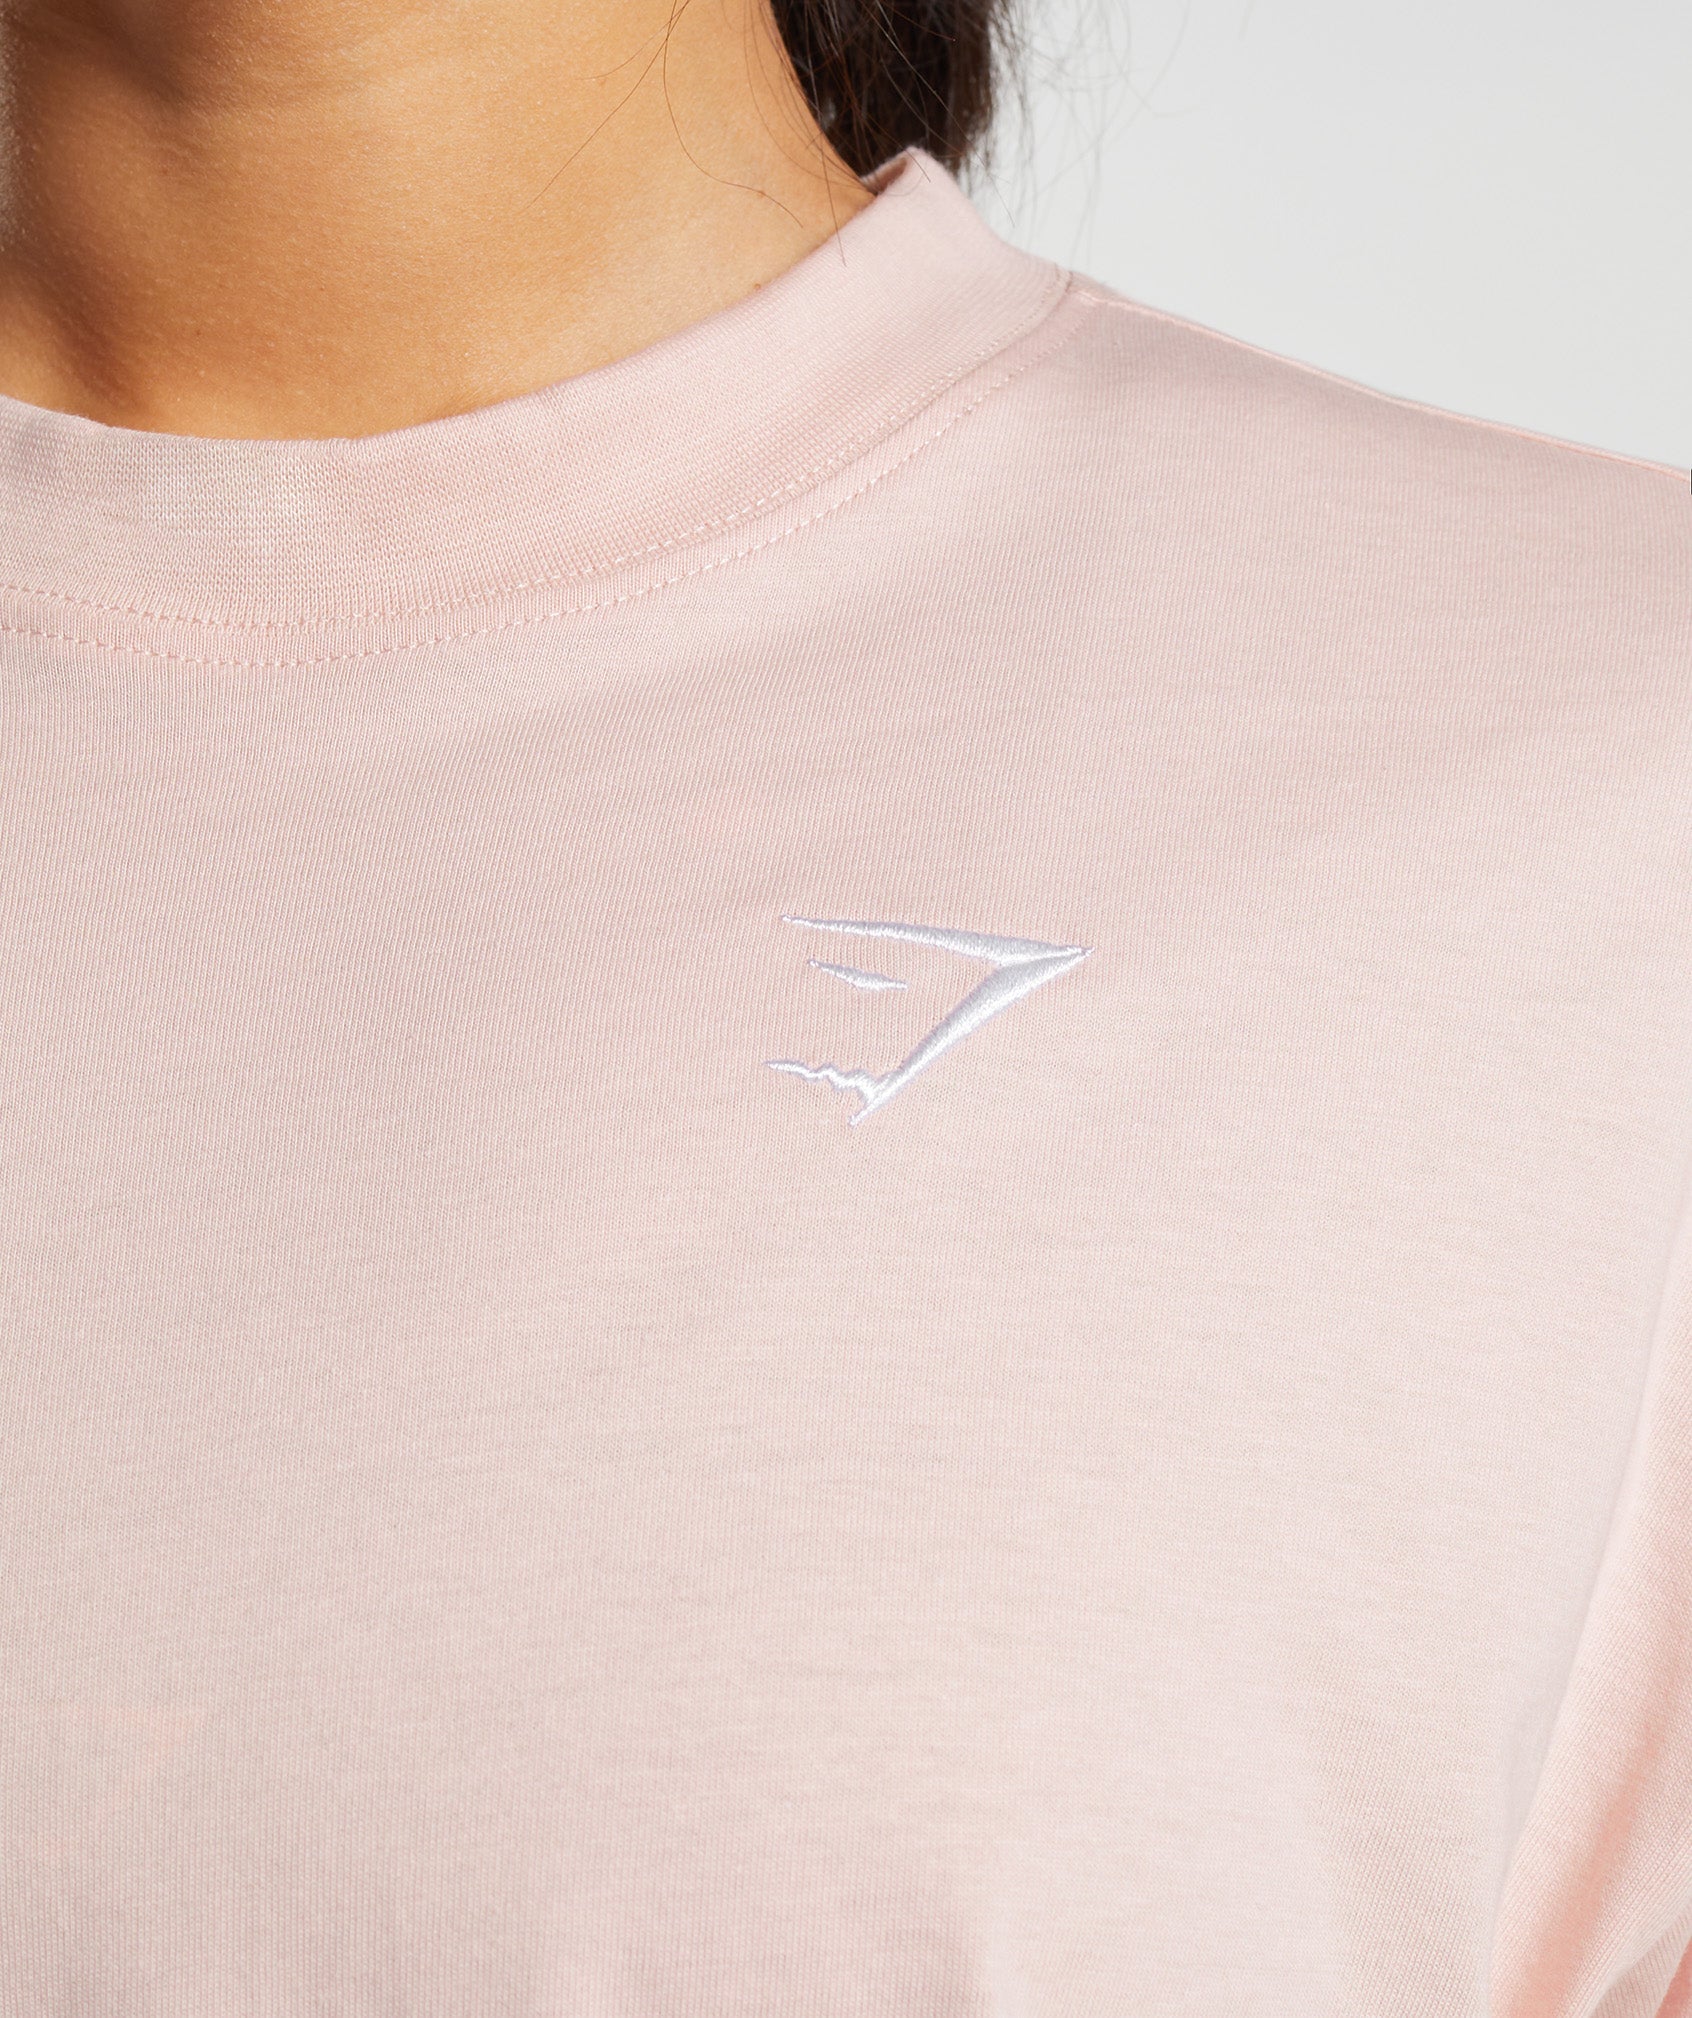 Training Oversized T-Shirt in Misty Pink